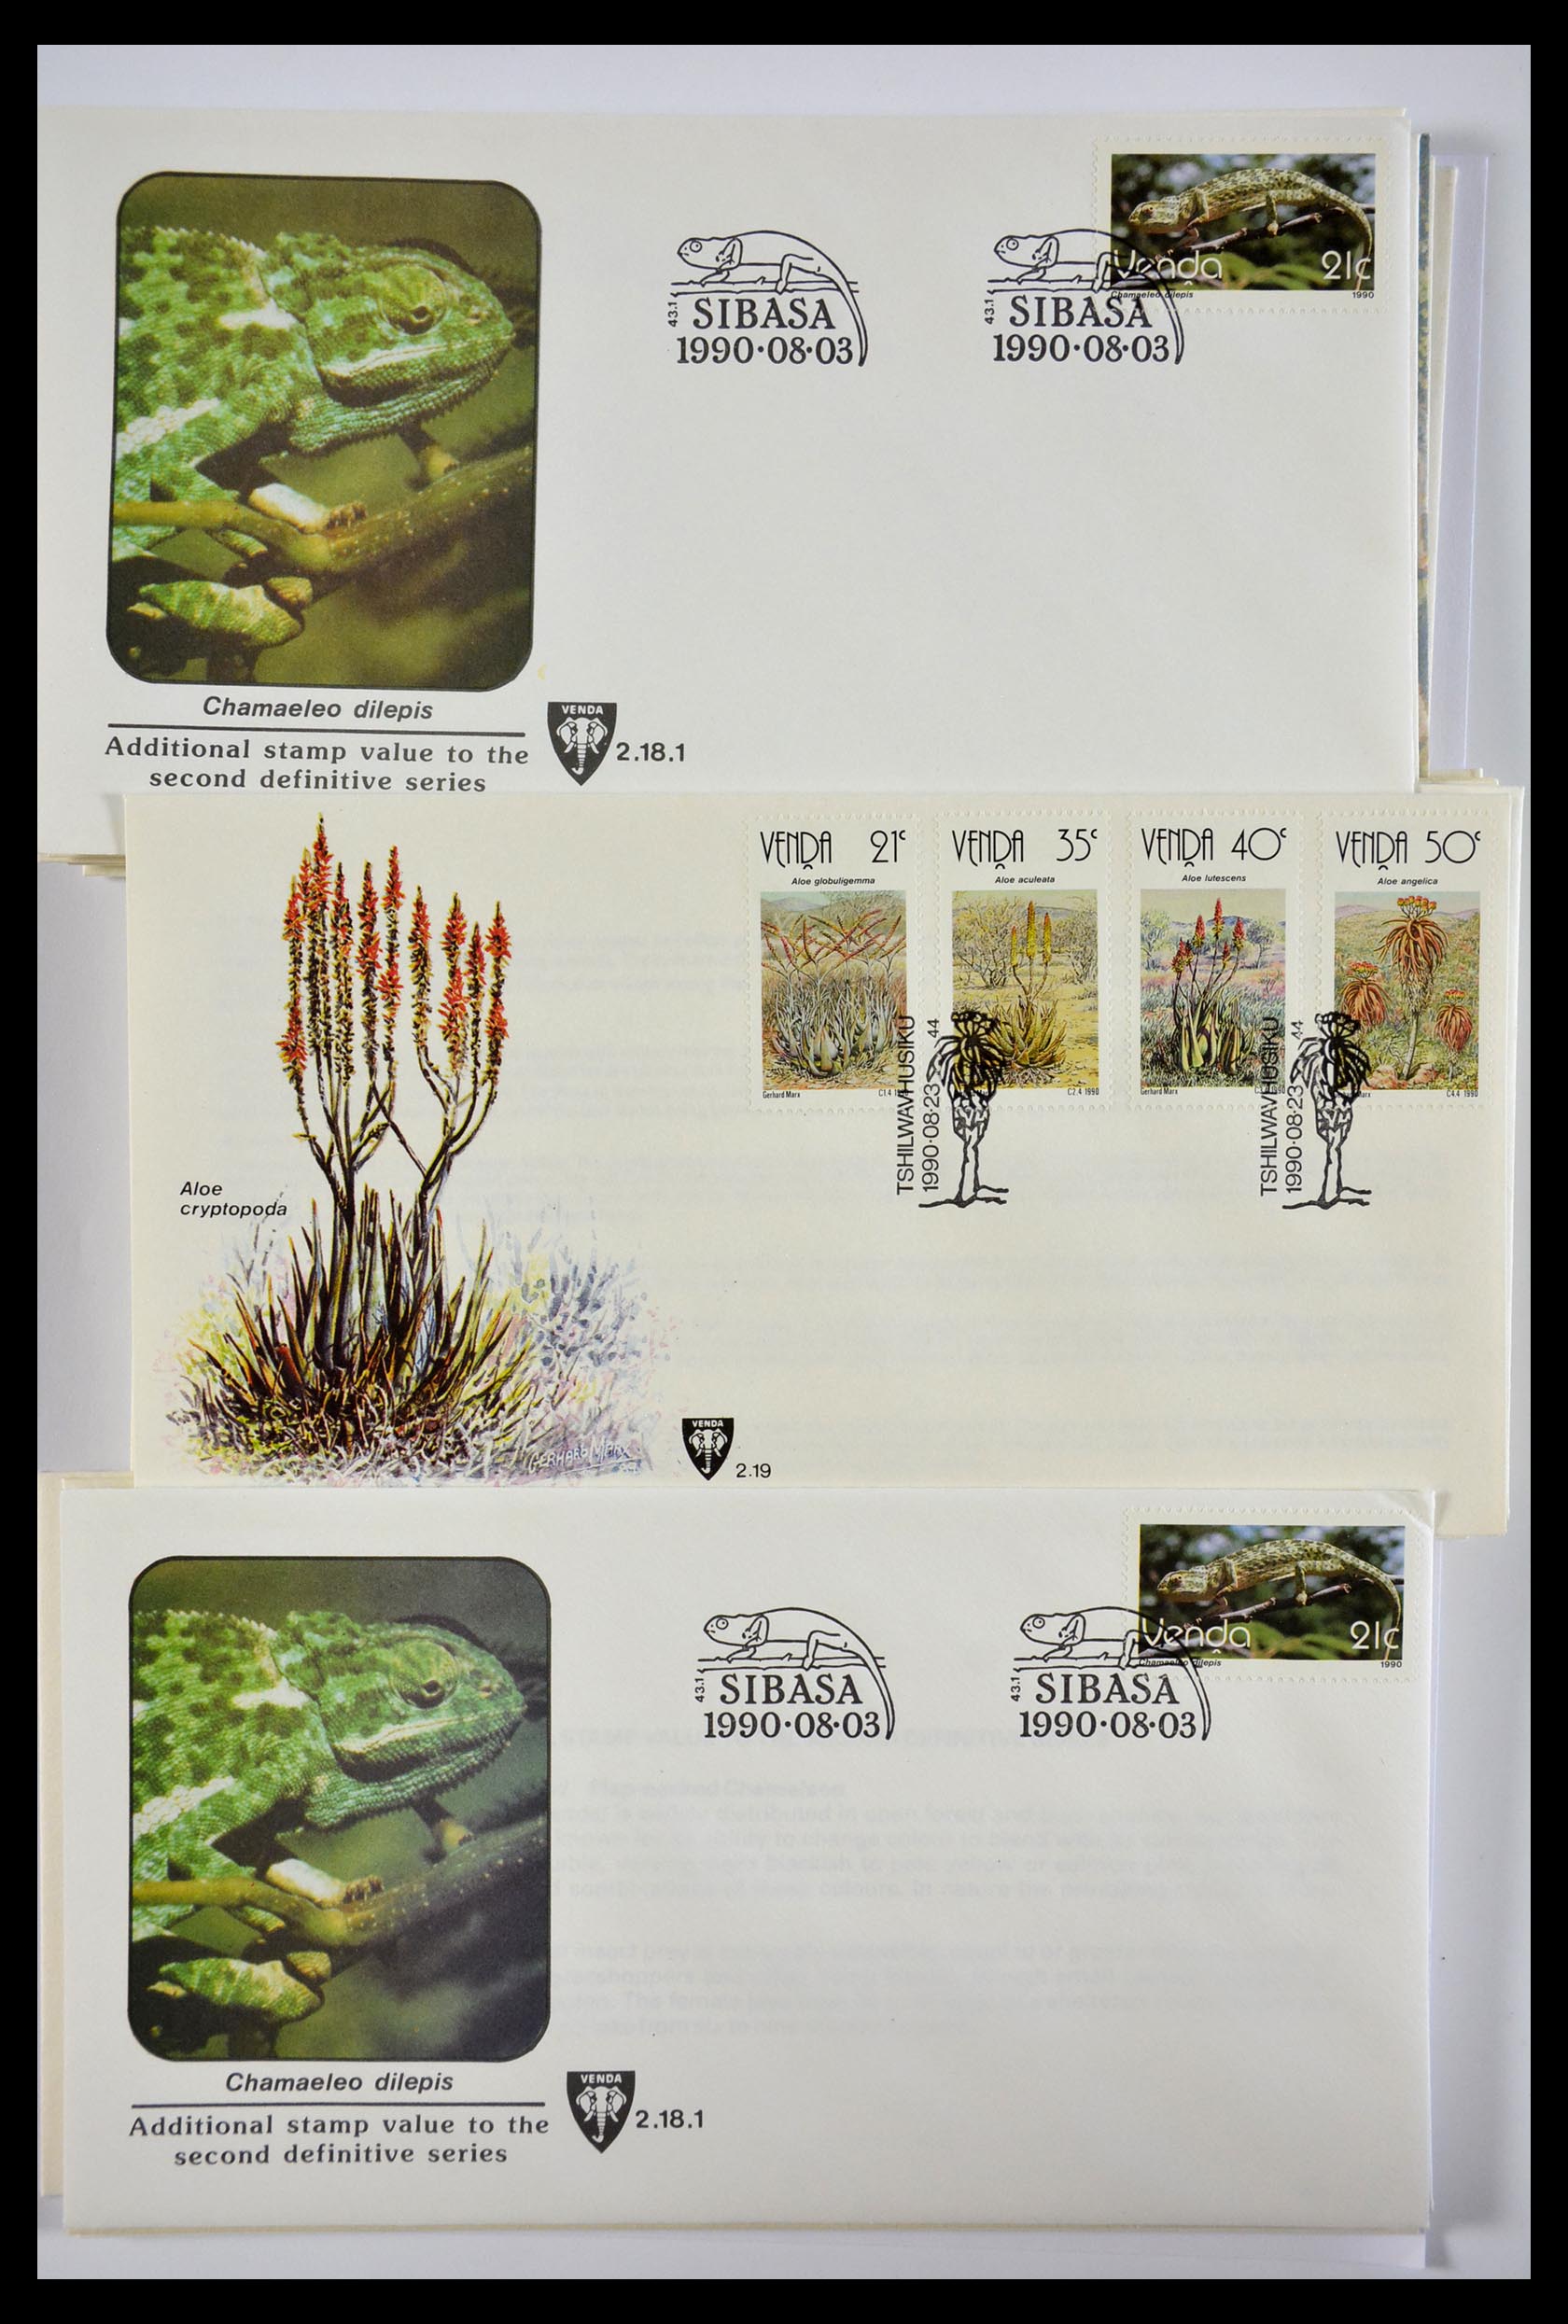 29356 579 - 29356 South Africa homelands first day covers 1979-1991.